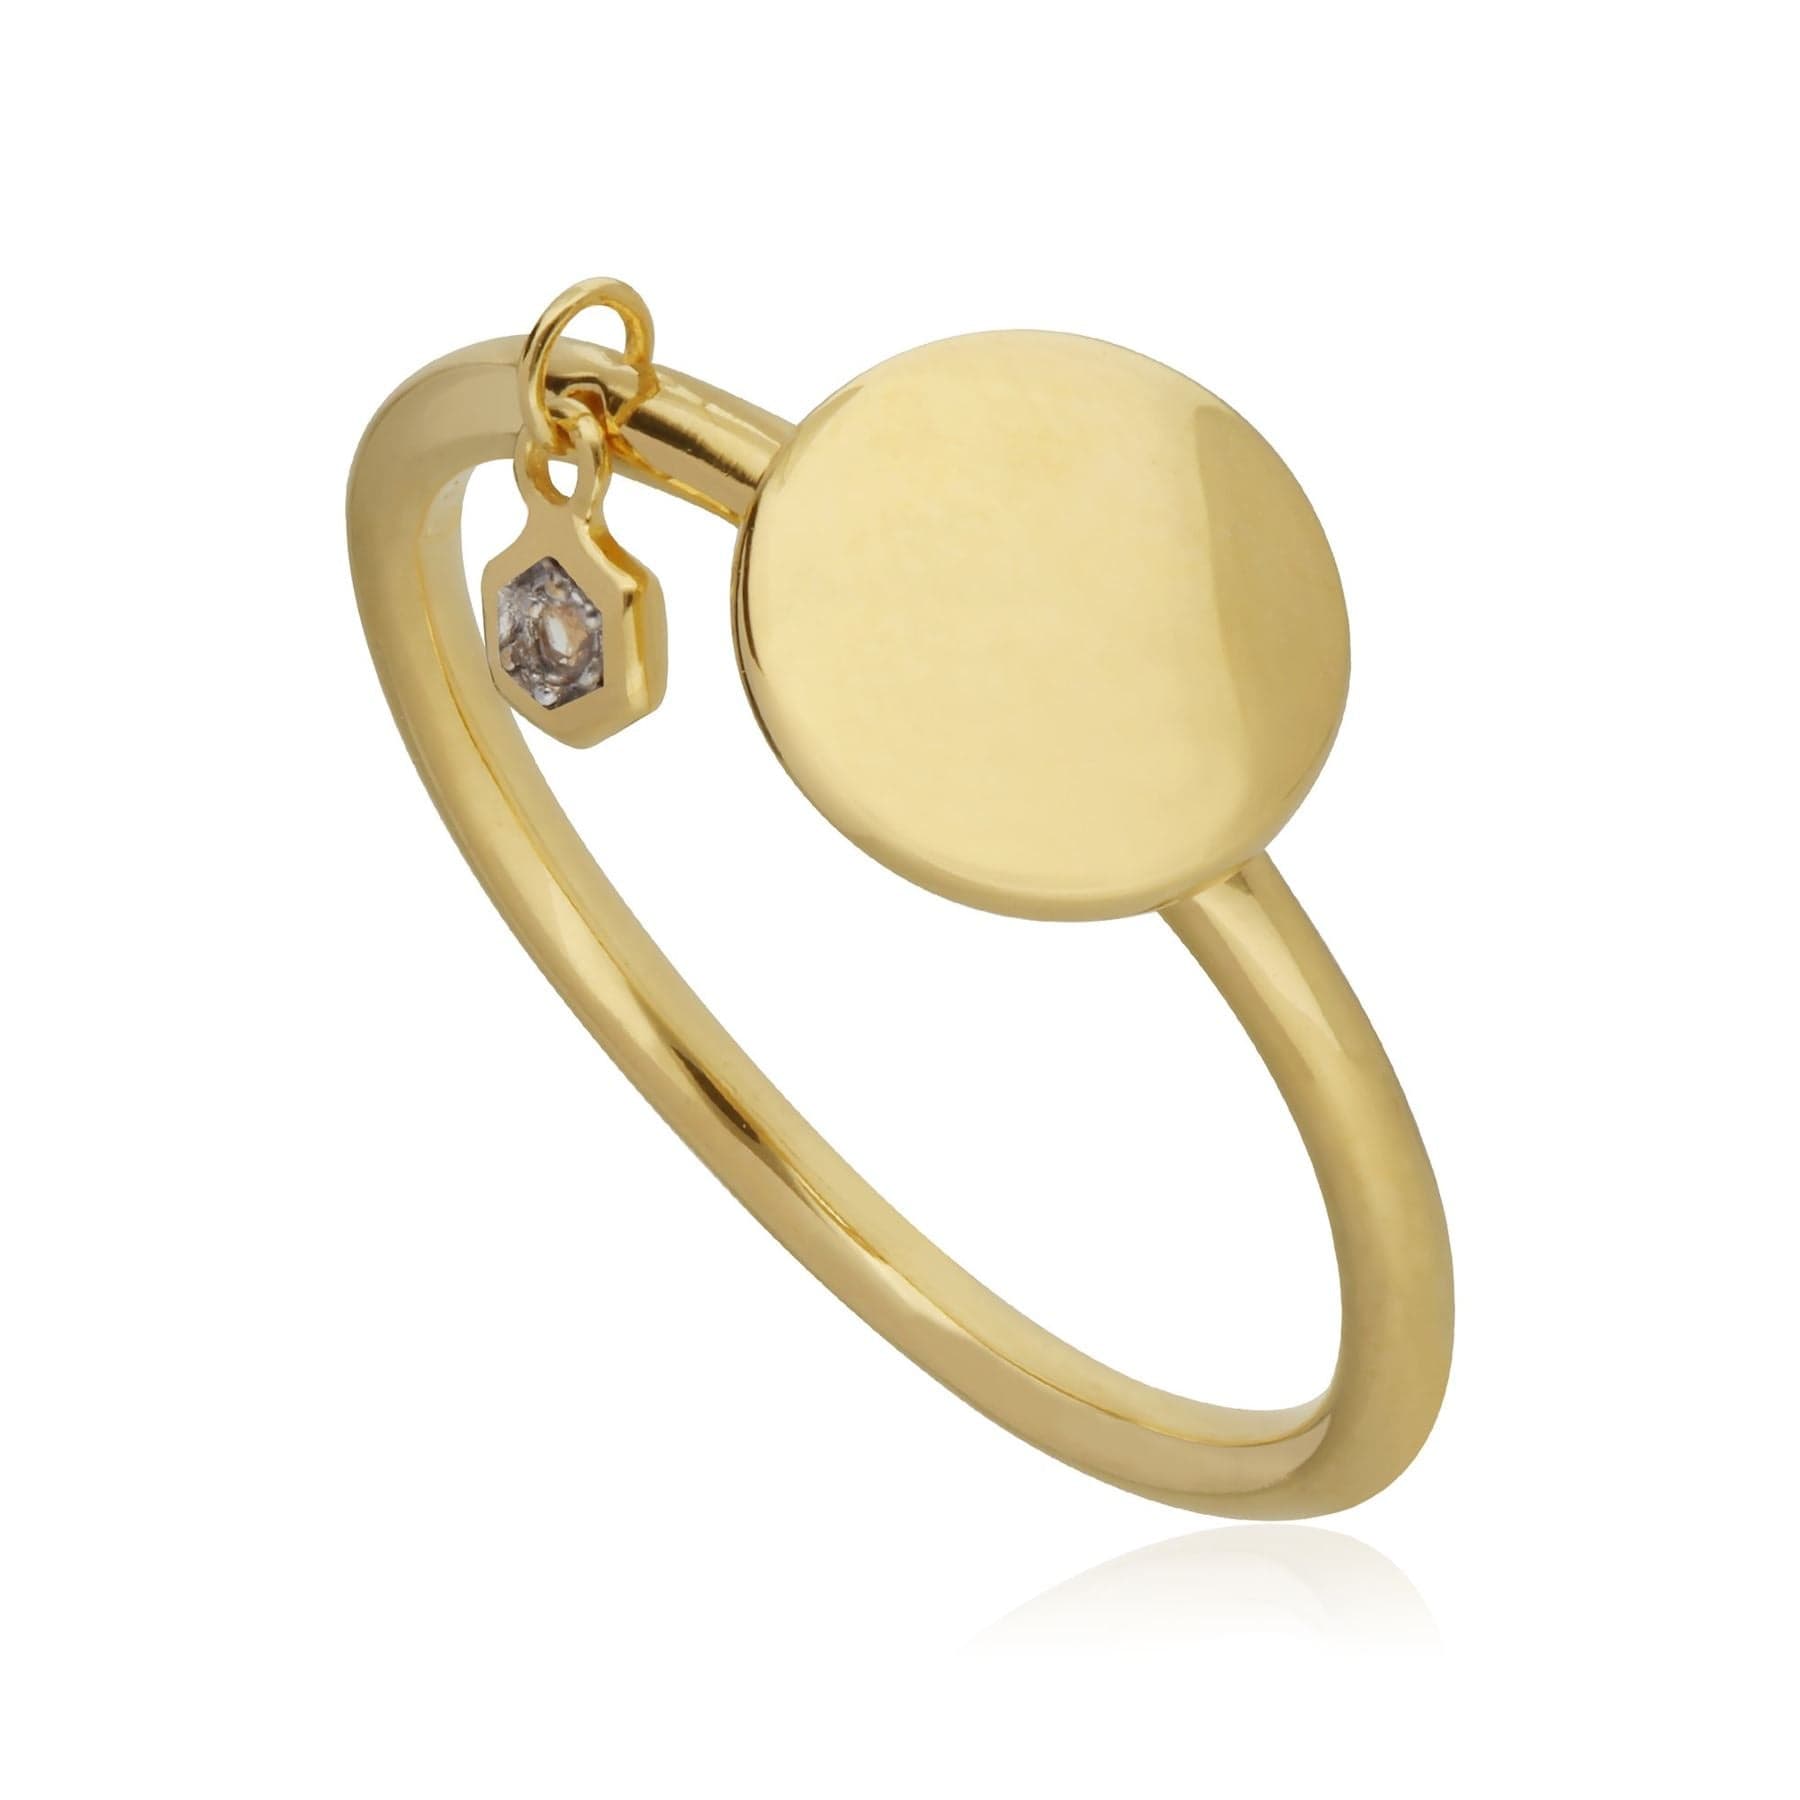 White Topaz Engravable Ring in Yellow Gold Plated Sterling Silver - Gemondo